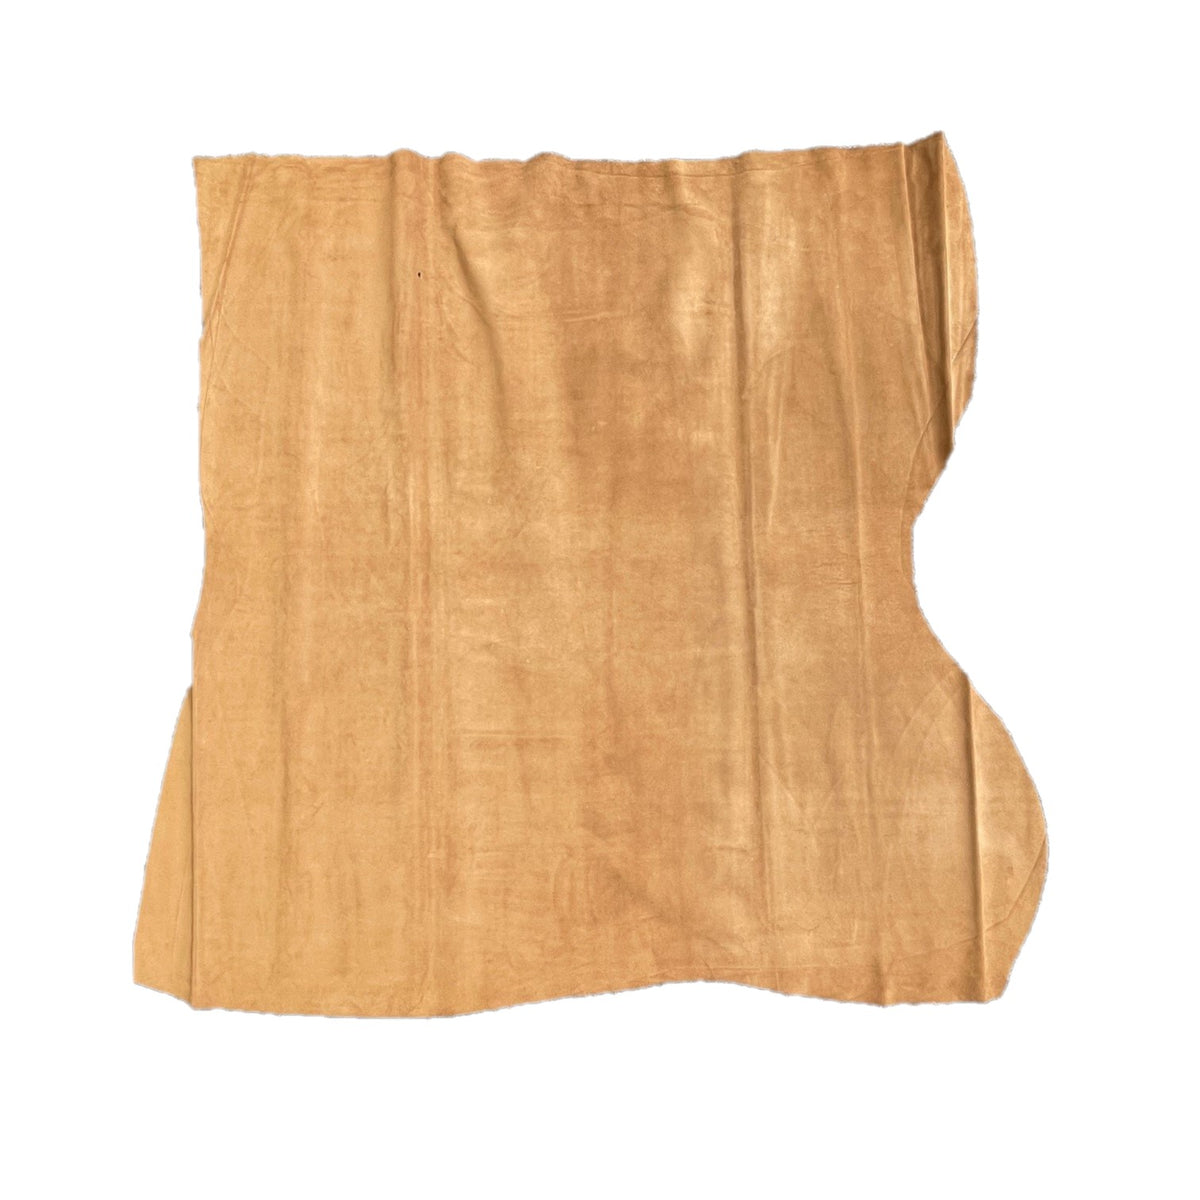 Cow Jersey Suede Double Butts | Tan | 1.2 mm | 13 sq.ft | From $75 ea.